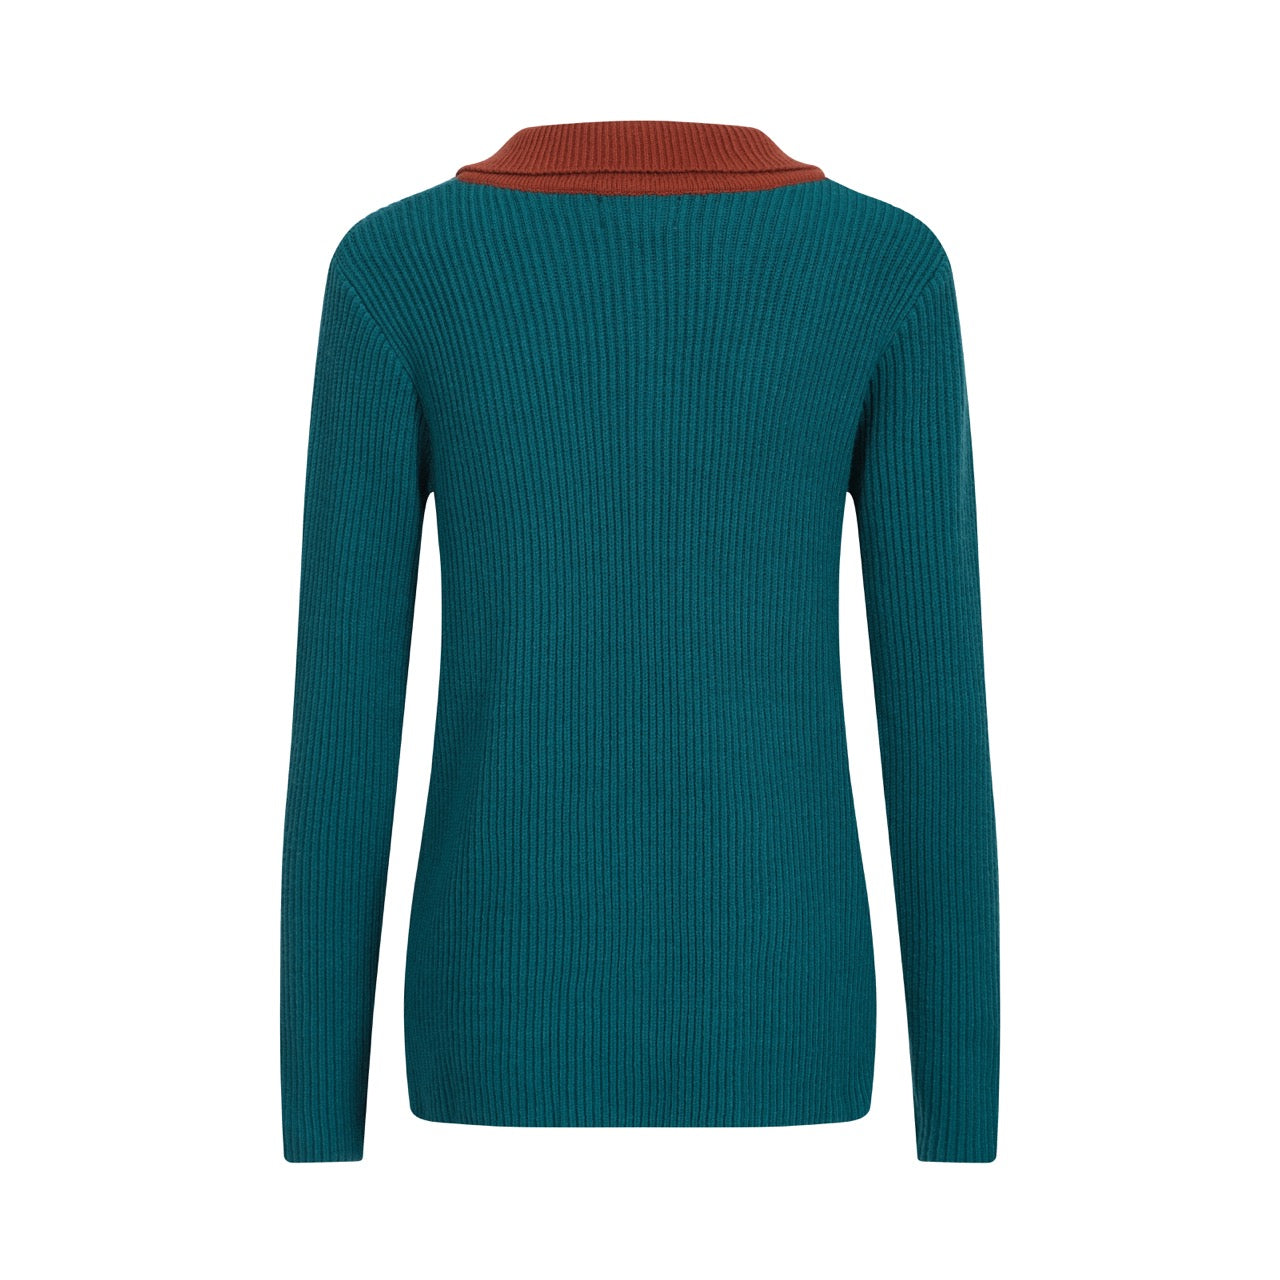 Women Malachite Green Long Sleeve Knitted Wear with Brown Collar